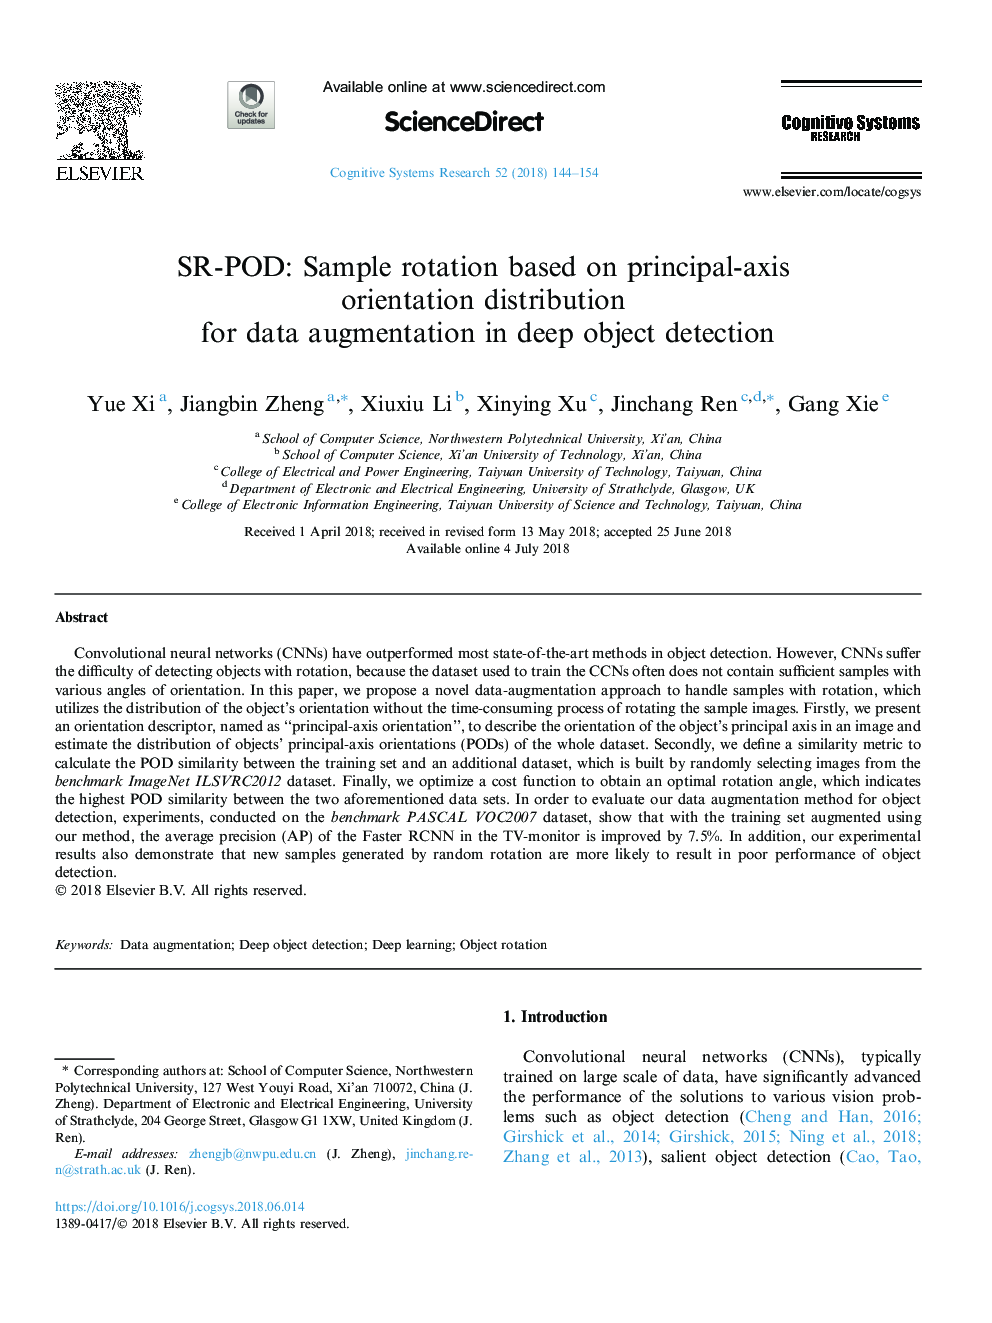 SR-POD: Sample rotation based on principal-axis orientation distribution for data augmentation in deep object detection